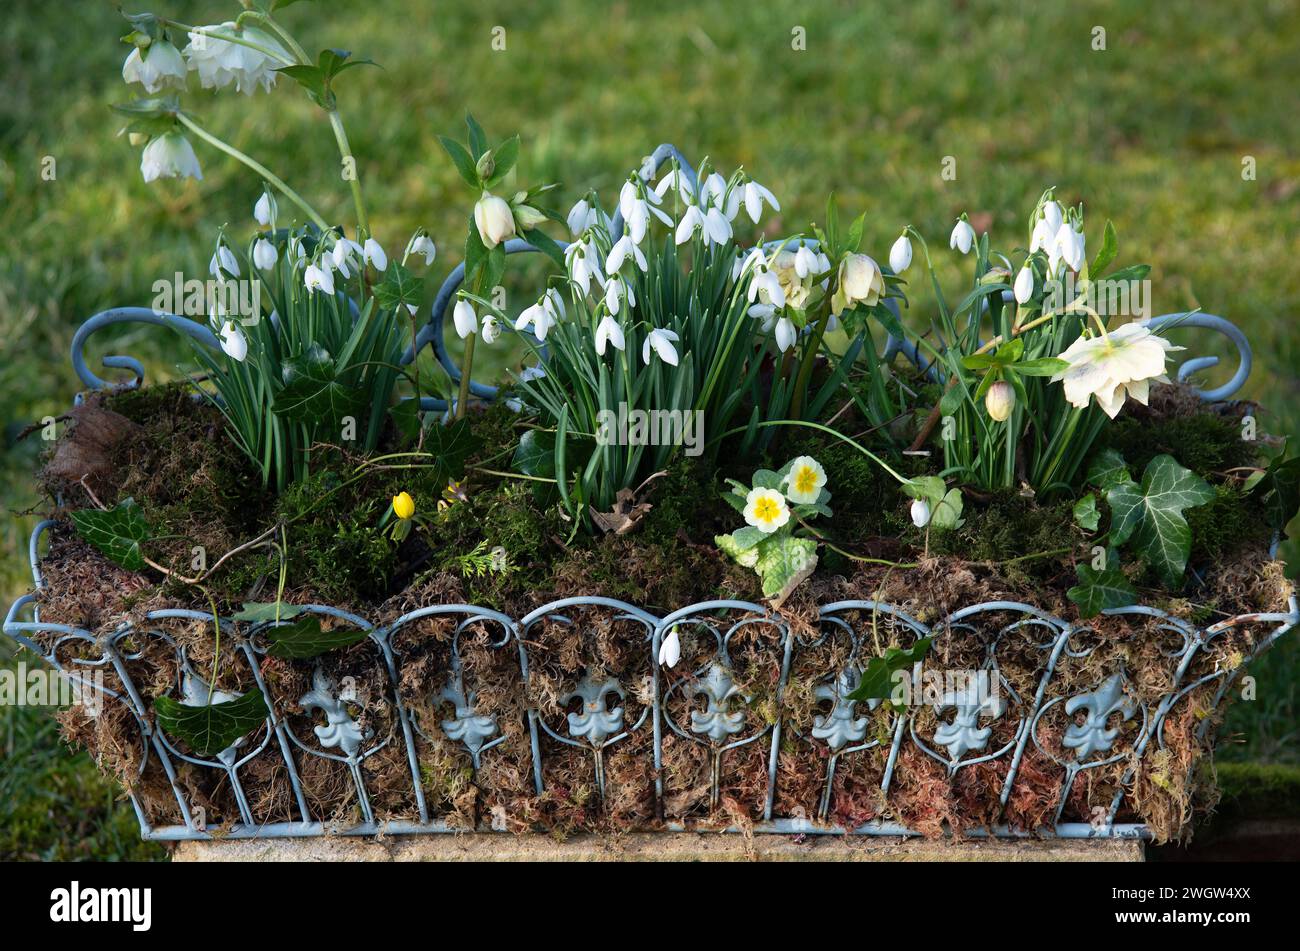 Vintage-style wirework planter with winter-flowering plants Stock Photo